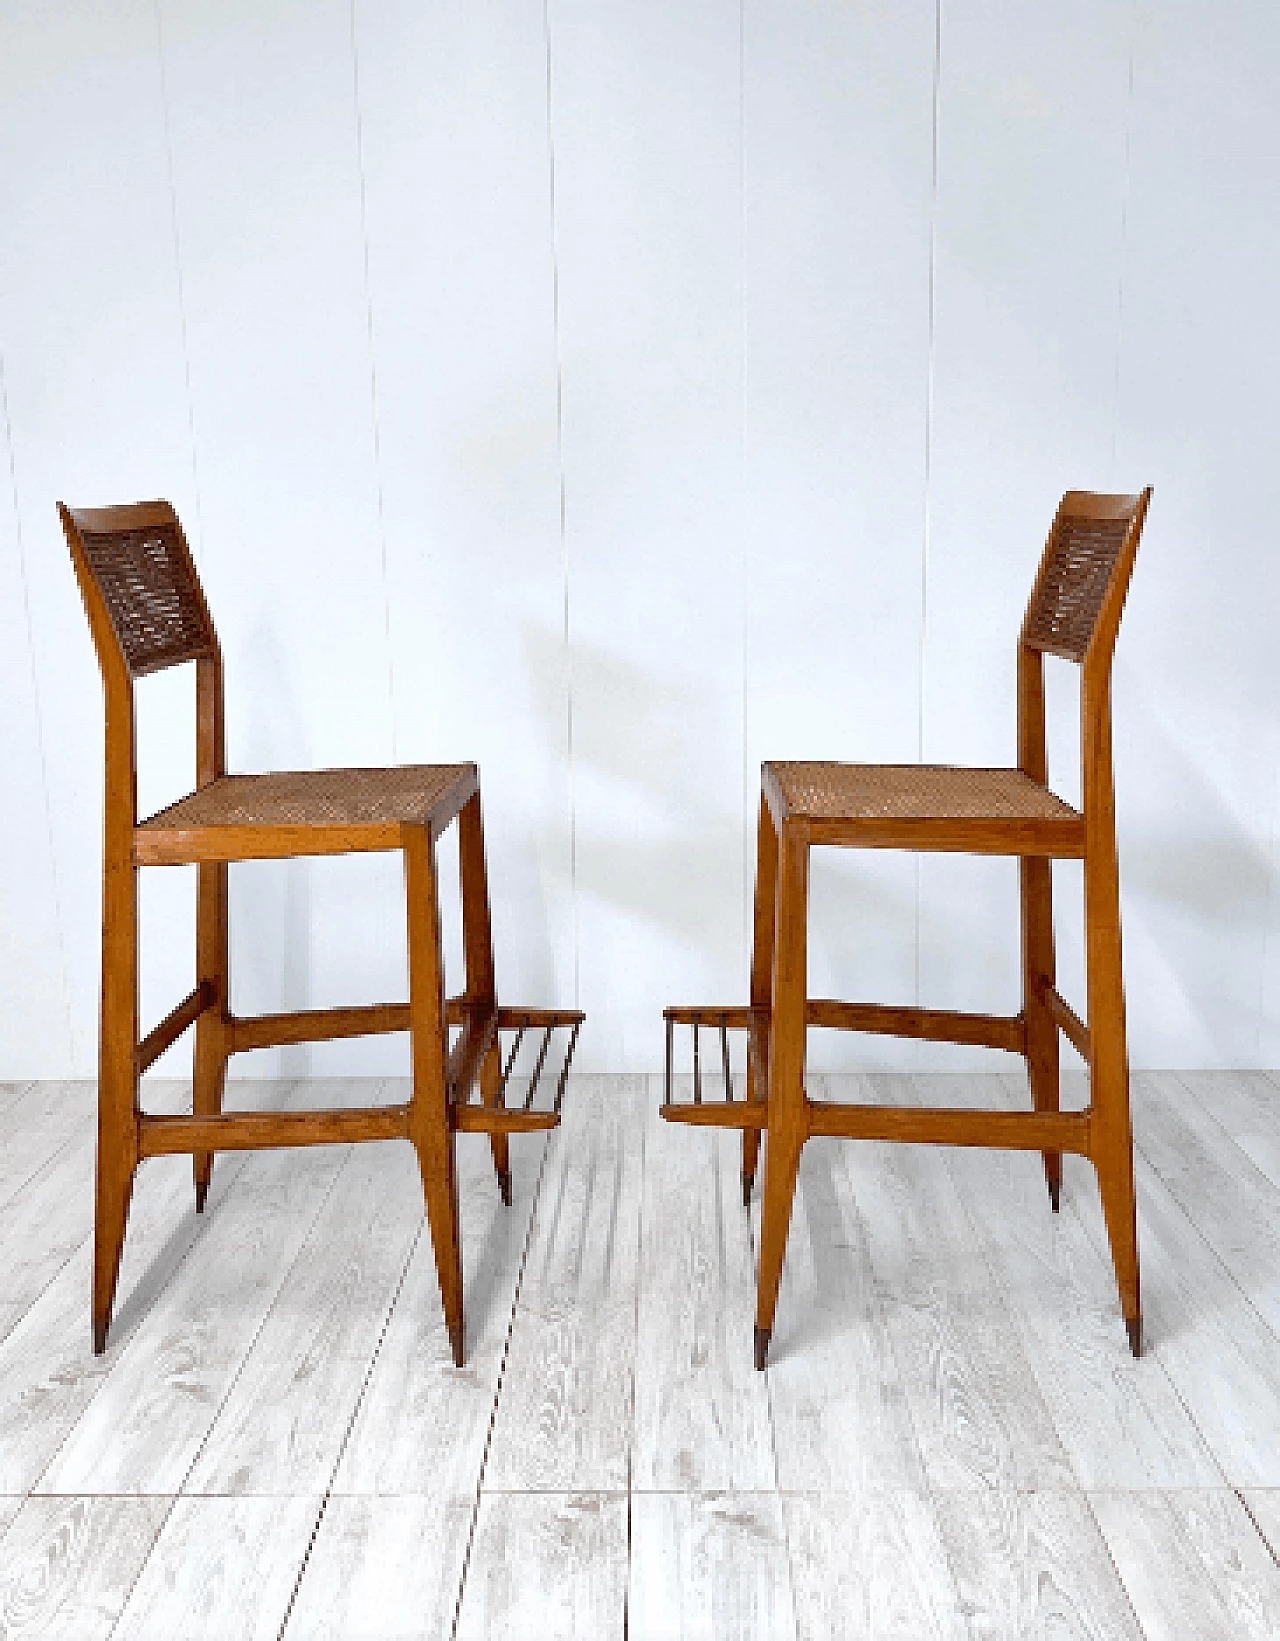 Pair of croupier stools by Gio Ponti for the Sanremo Casino, 1950s 8